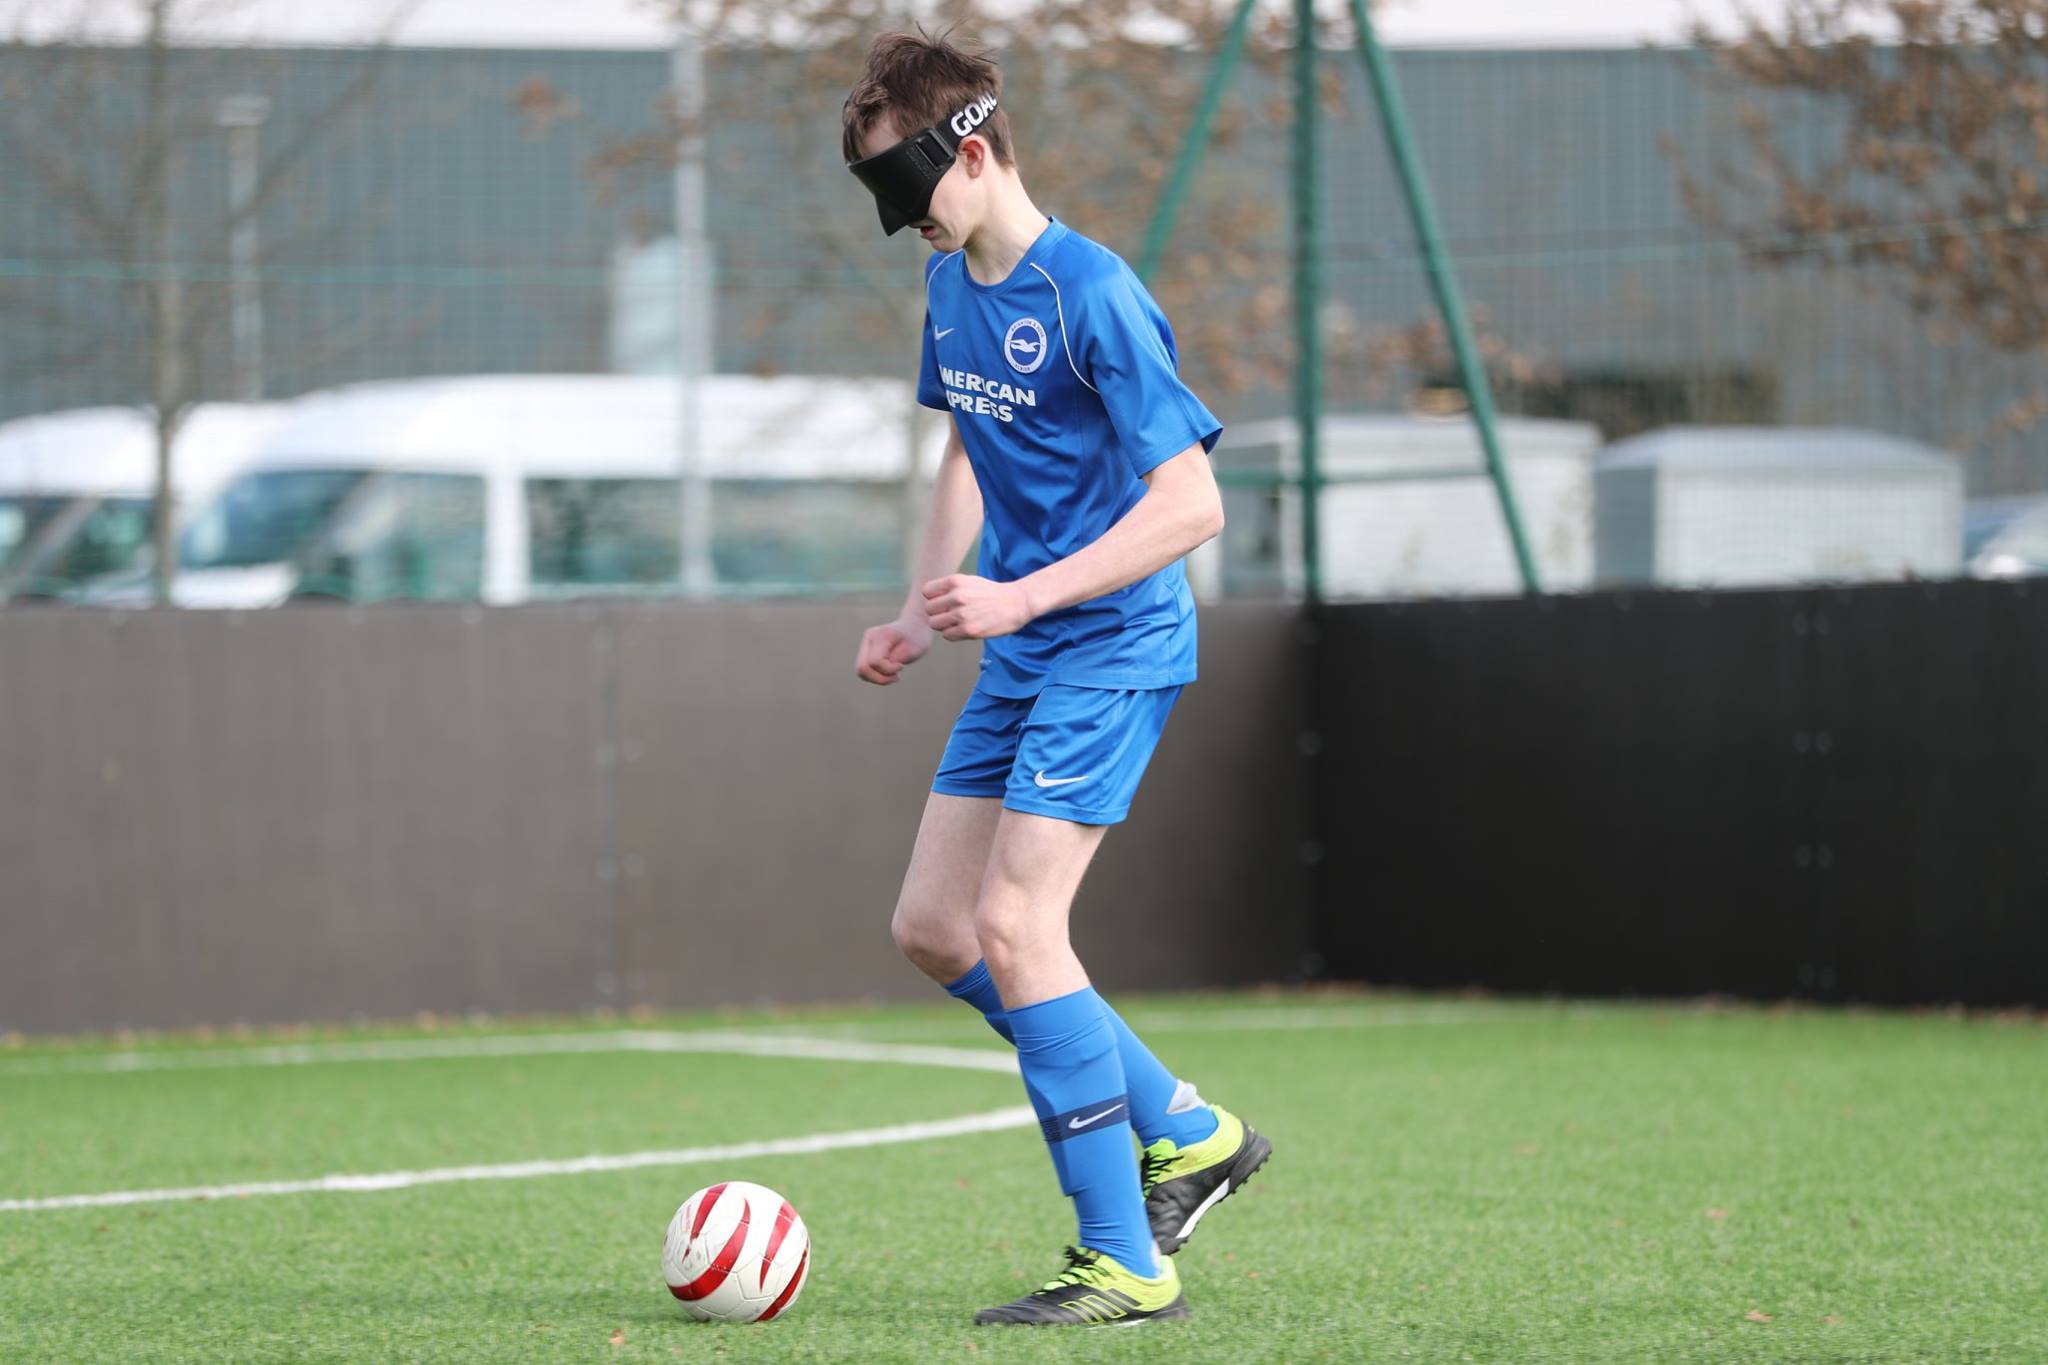 Helping to develop talent for FA blind football project